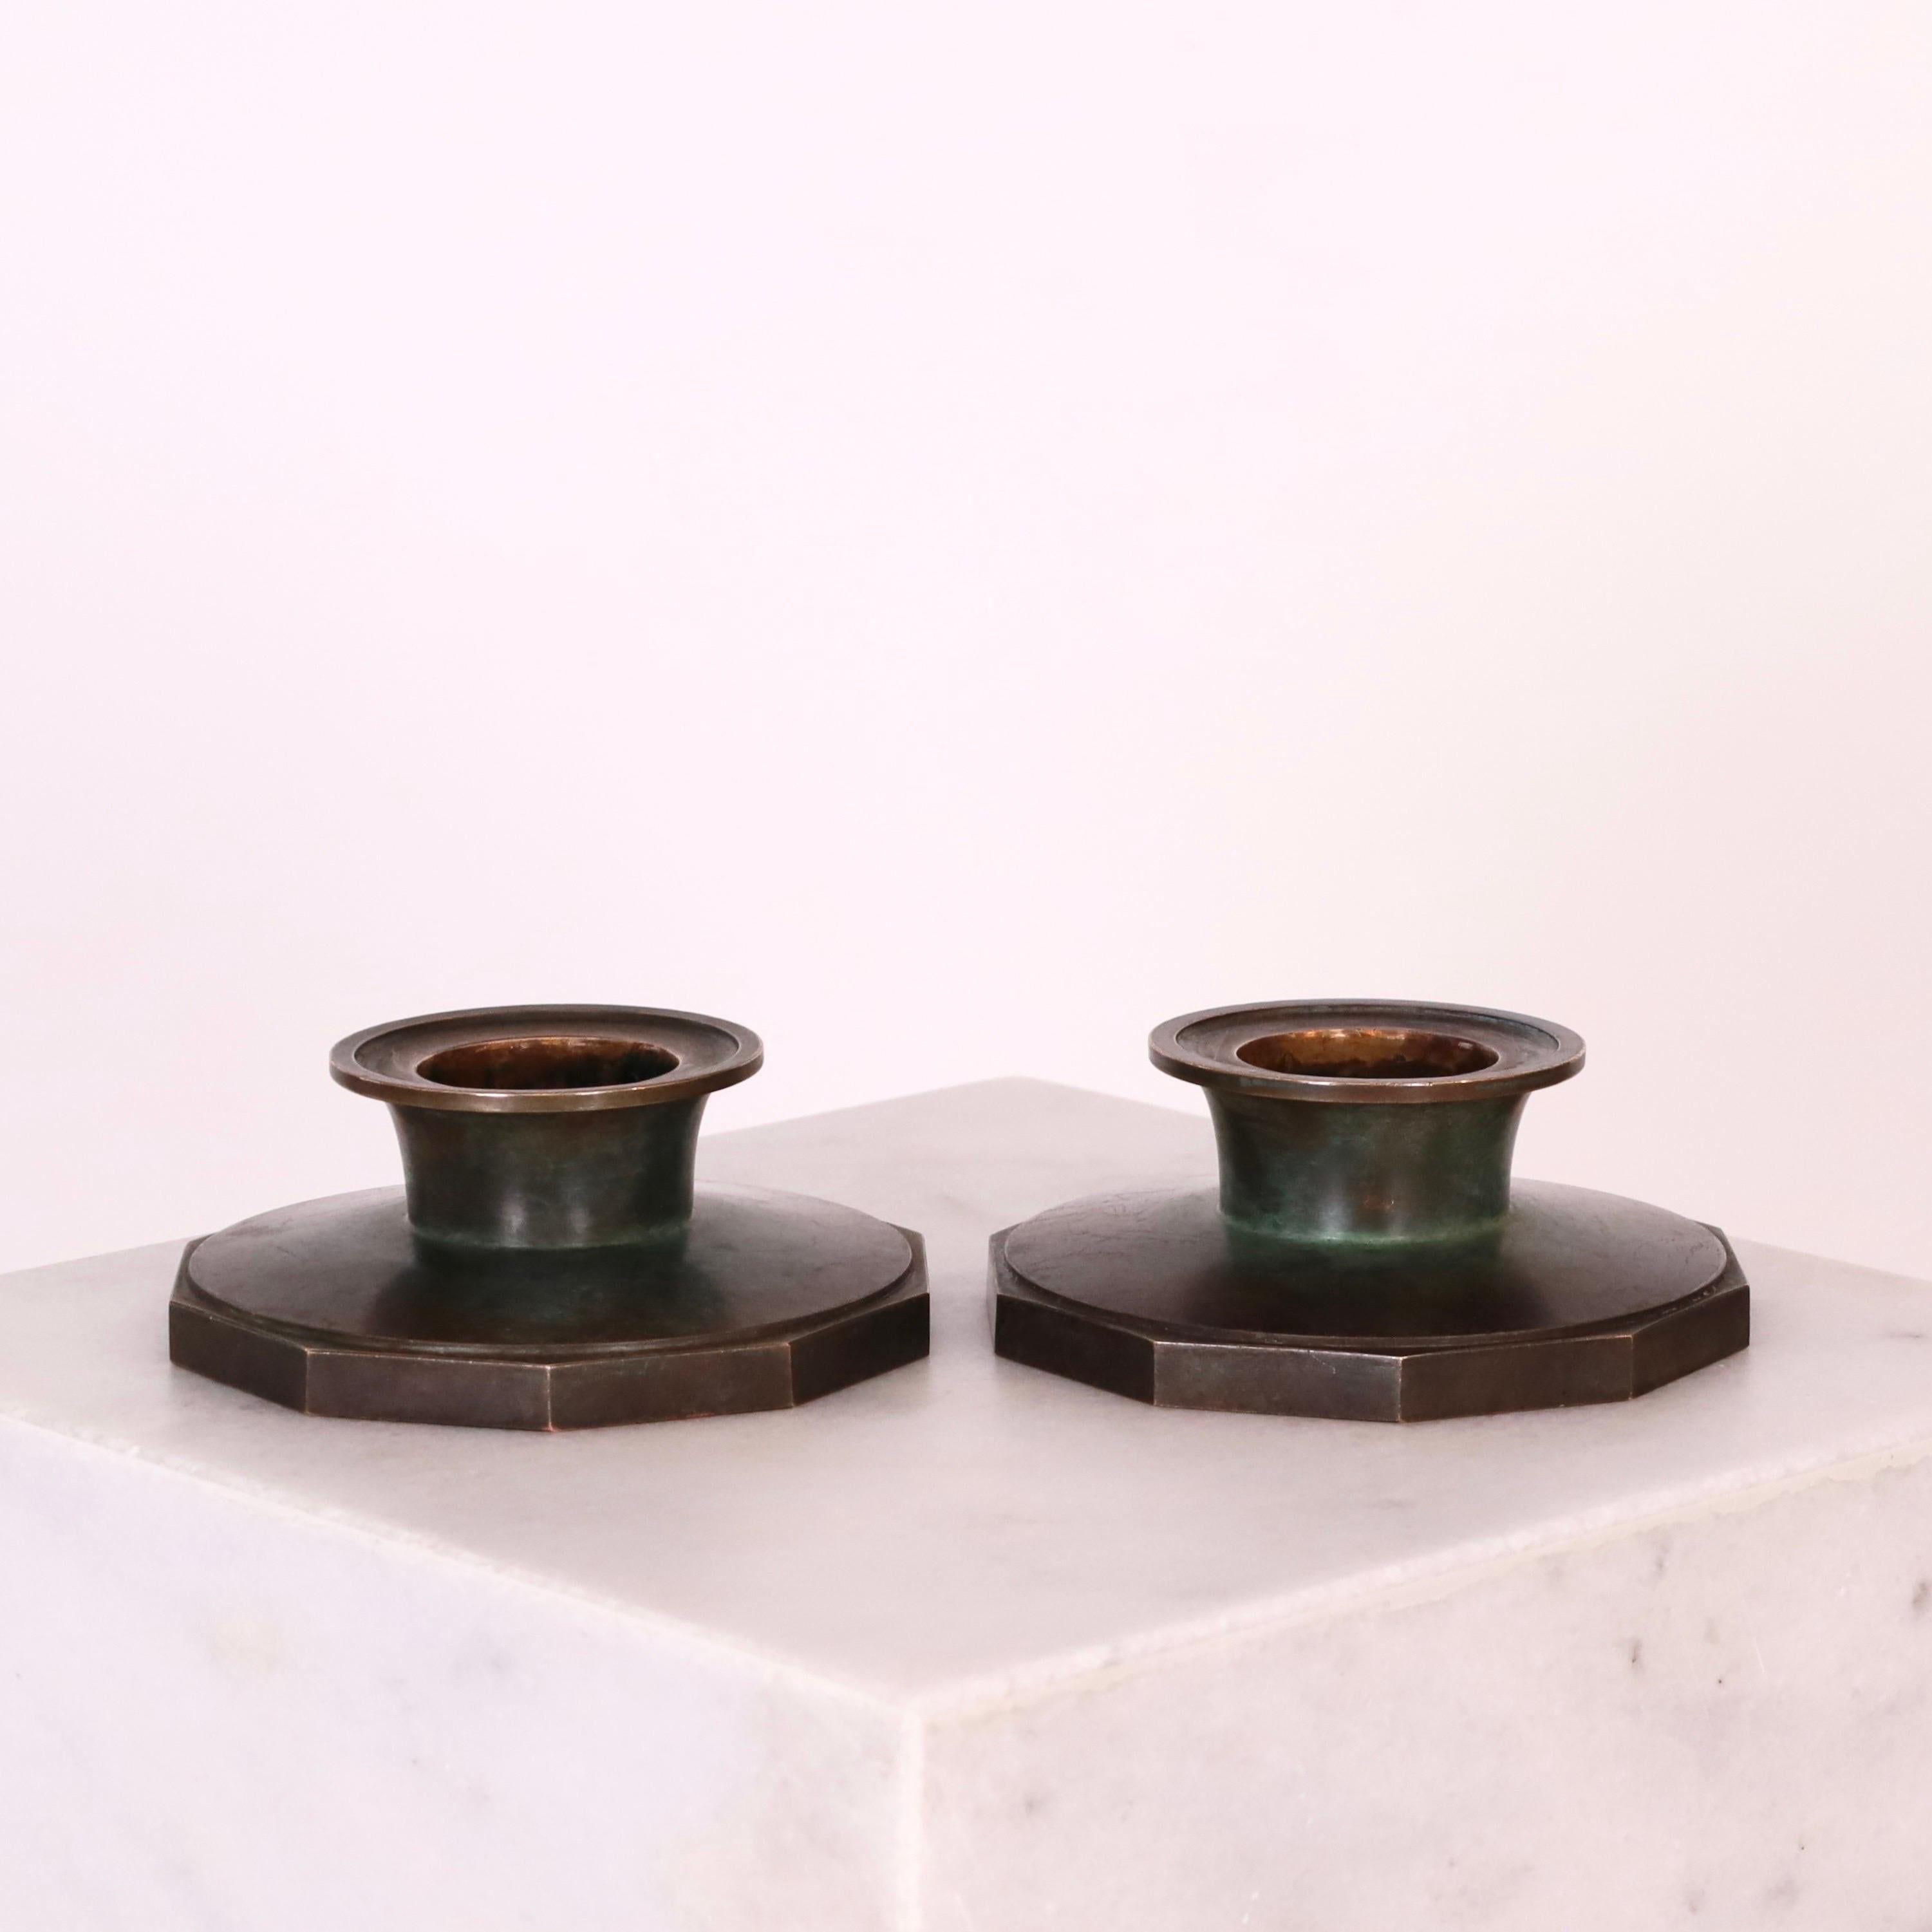 A set of subtile bronze candle holders designed by Just Andersen in 1934. 

* A set of small 10-sided bronze candle holders
* Designer: Just Andersen
* Manufacturer: Just Andersen
* Style: B1607
* Year: 1934
* Condition: Good vintage condition with